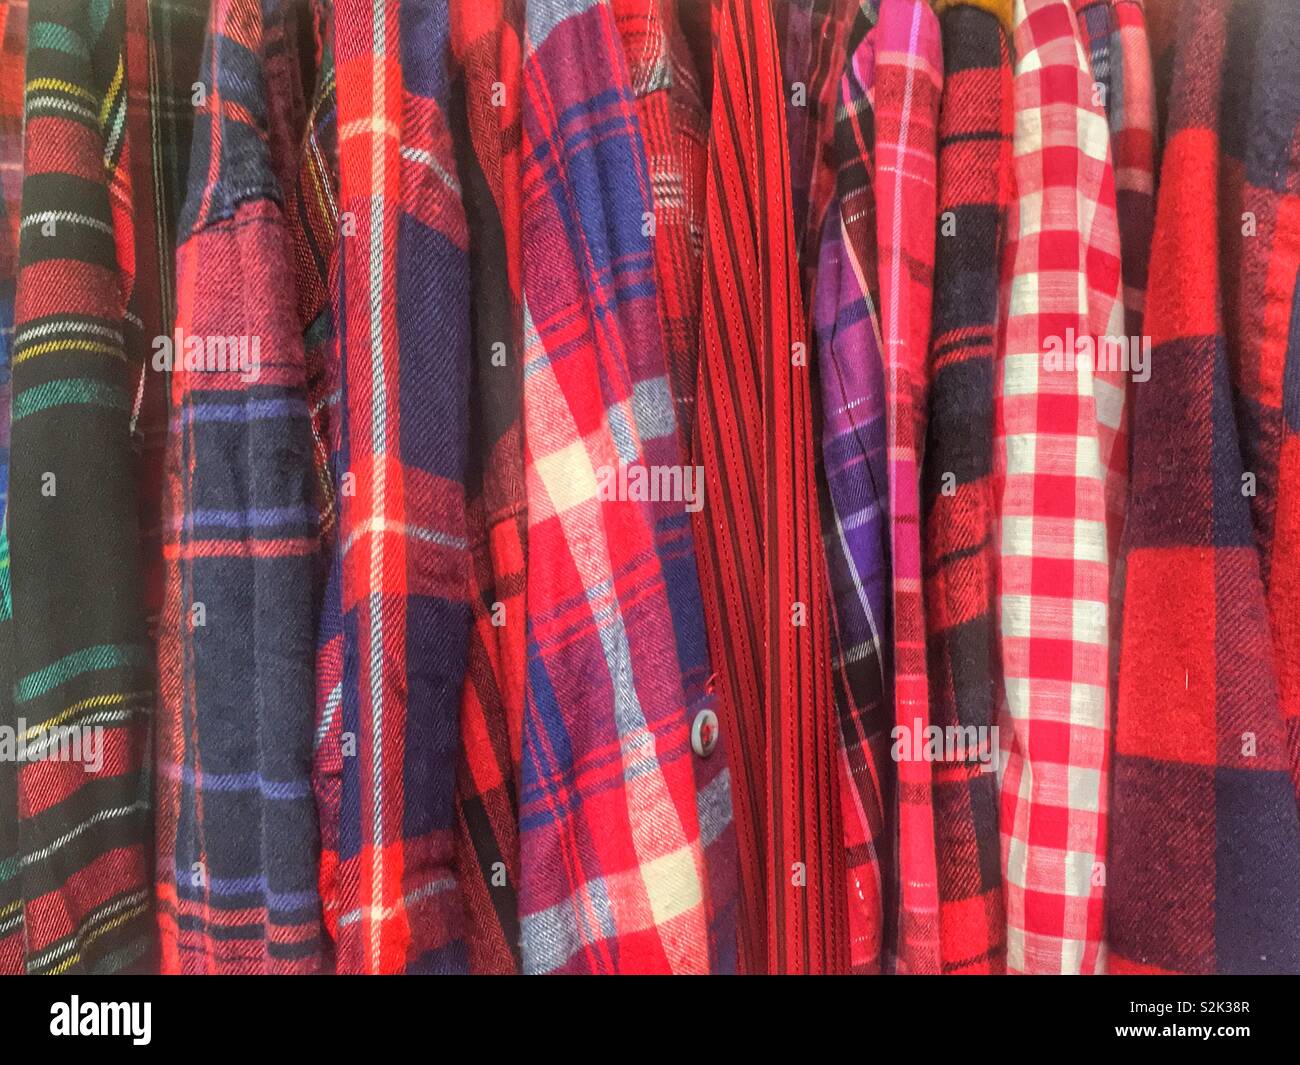 Side view of many fashionable red, blue, and black hued patterned and checkered clothes hanging on a clothing rack. Stock Photo